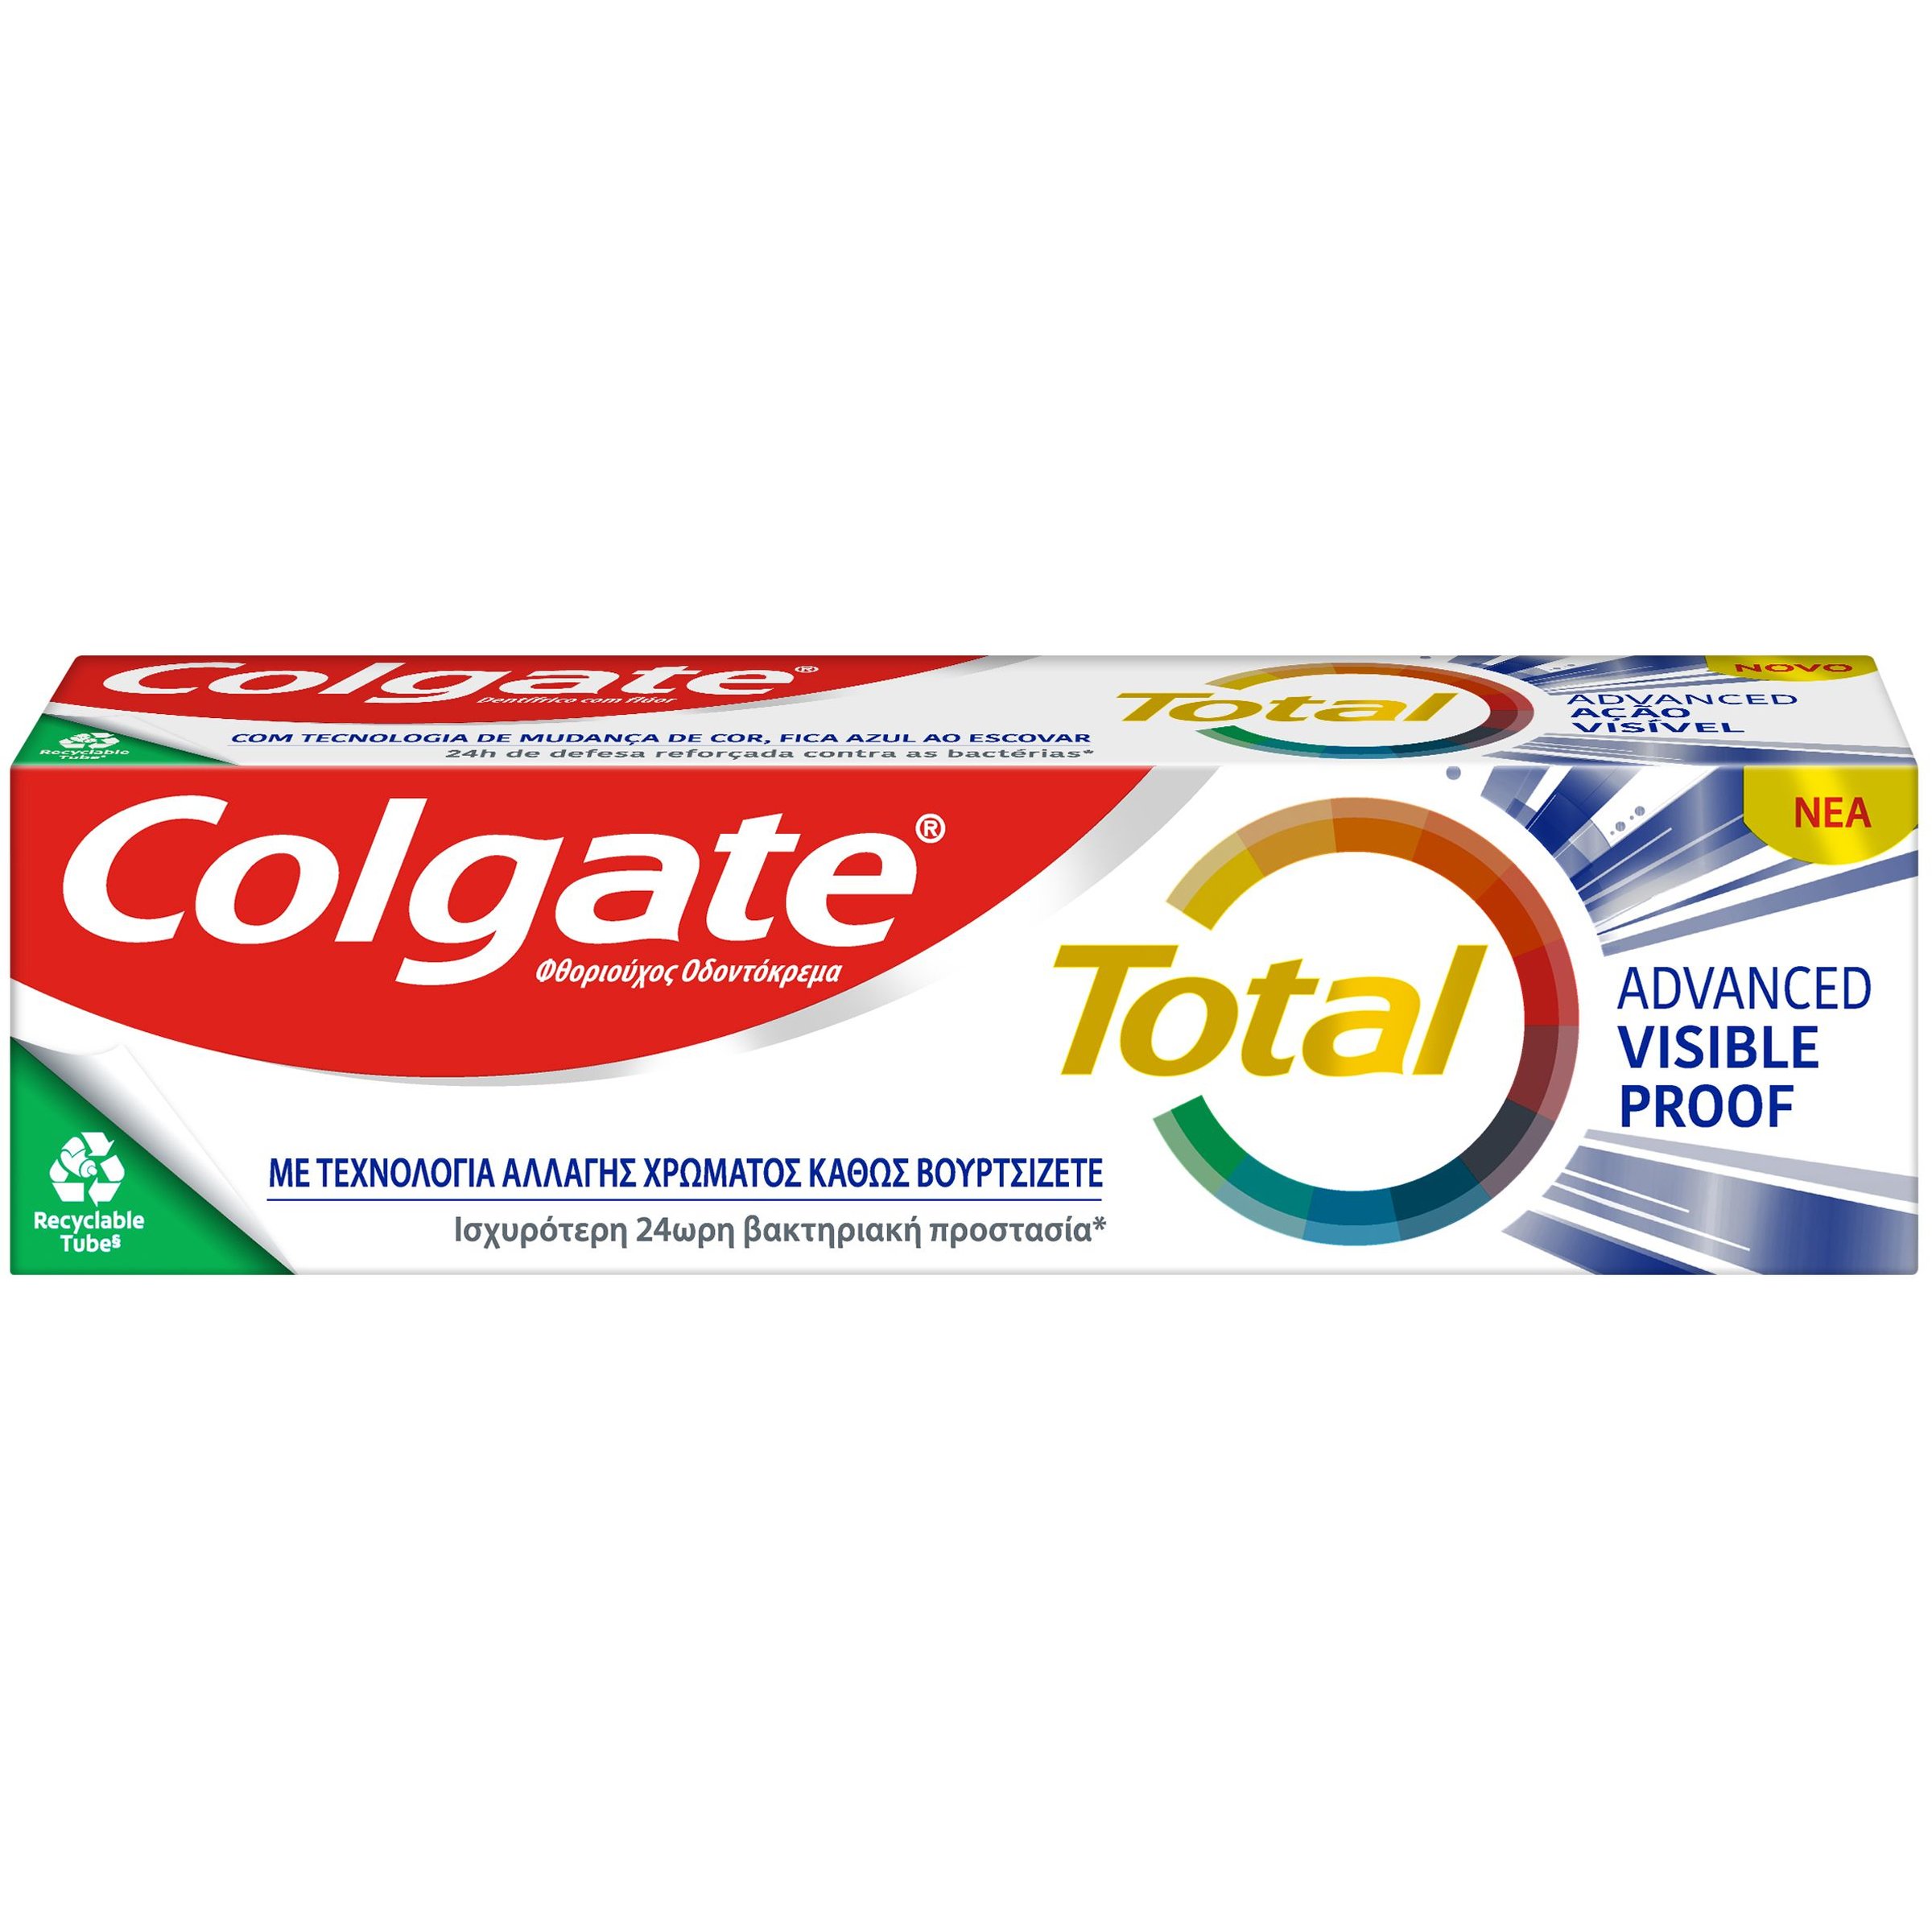 Colgate Total Advanced Visible Proof Toothpaste Φθοριούχος Οδοντόκρεμα για Προστασία από την Τερηδόνα & Δροσερή Αναπνοή 75ml